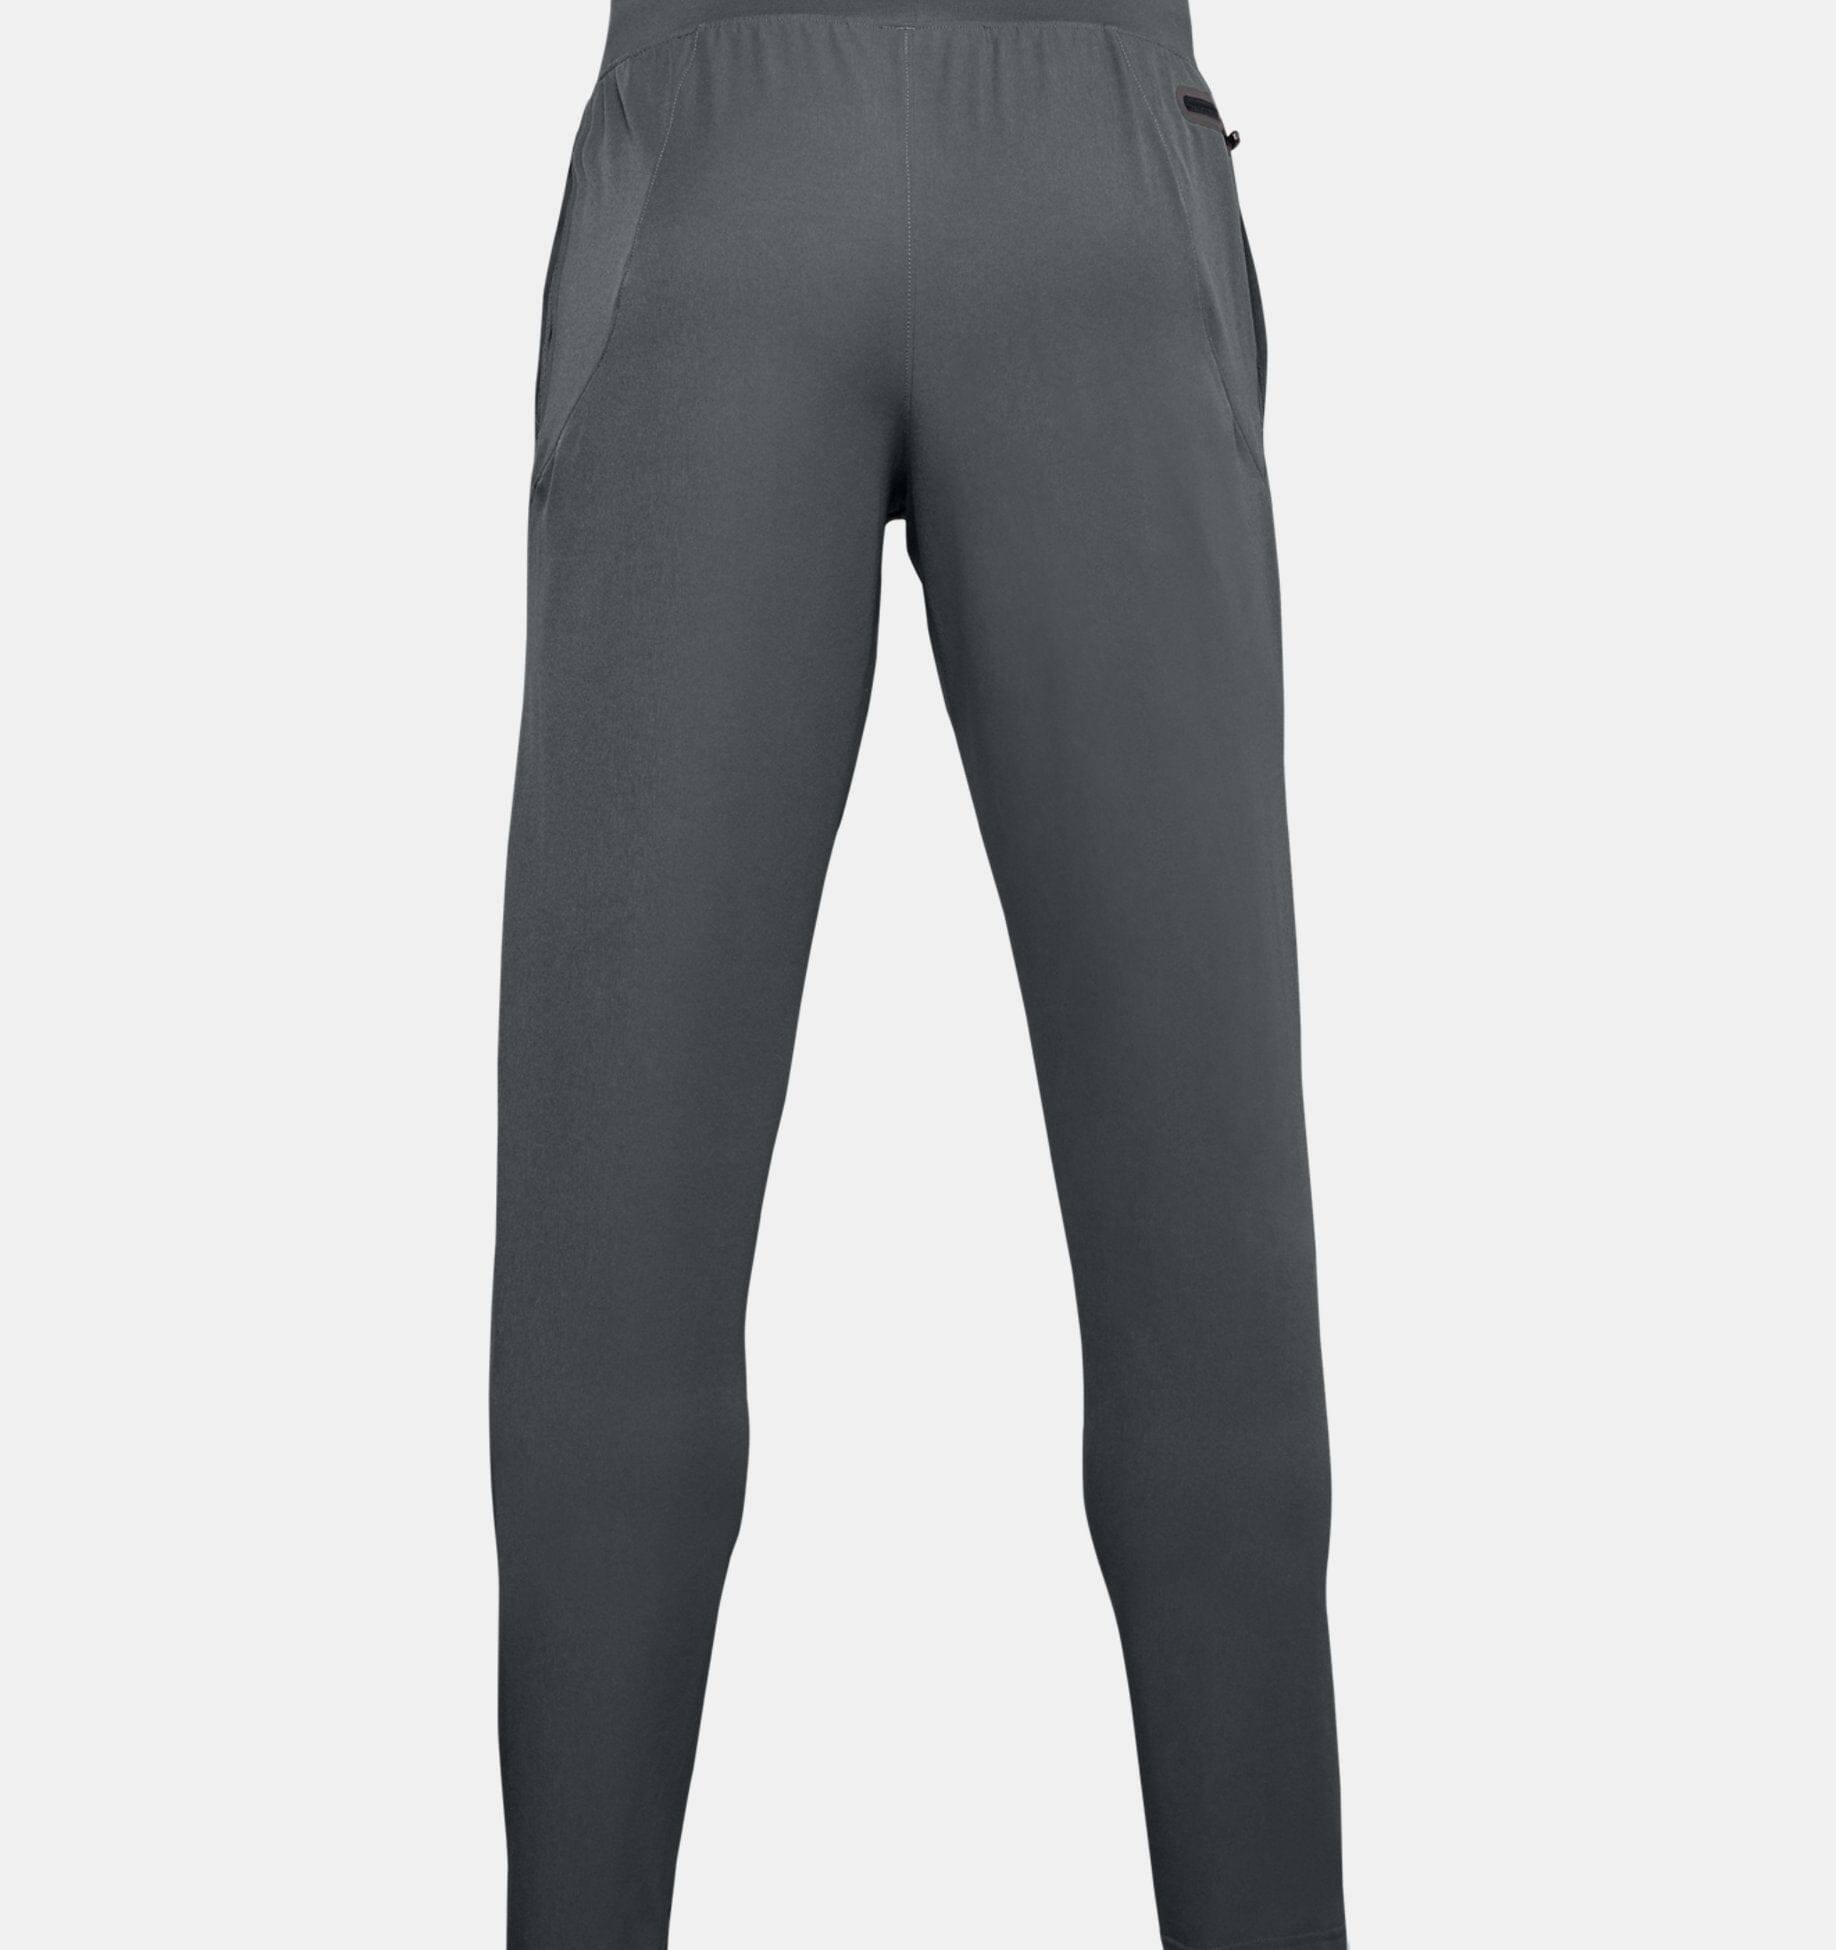 Under Armour Men's UA Sportstyle Elite Tapered Pants | 1373863-012 Pants Under Armour Adult X-Large Pitch Gray 